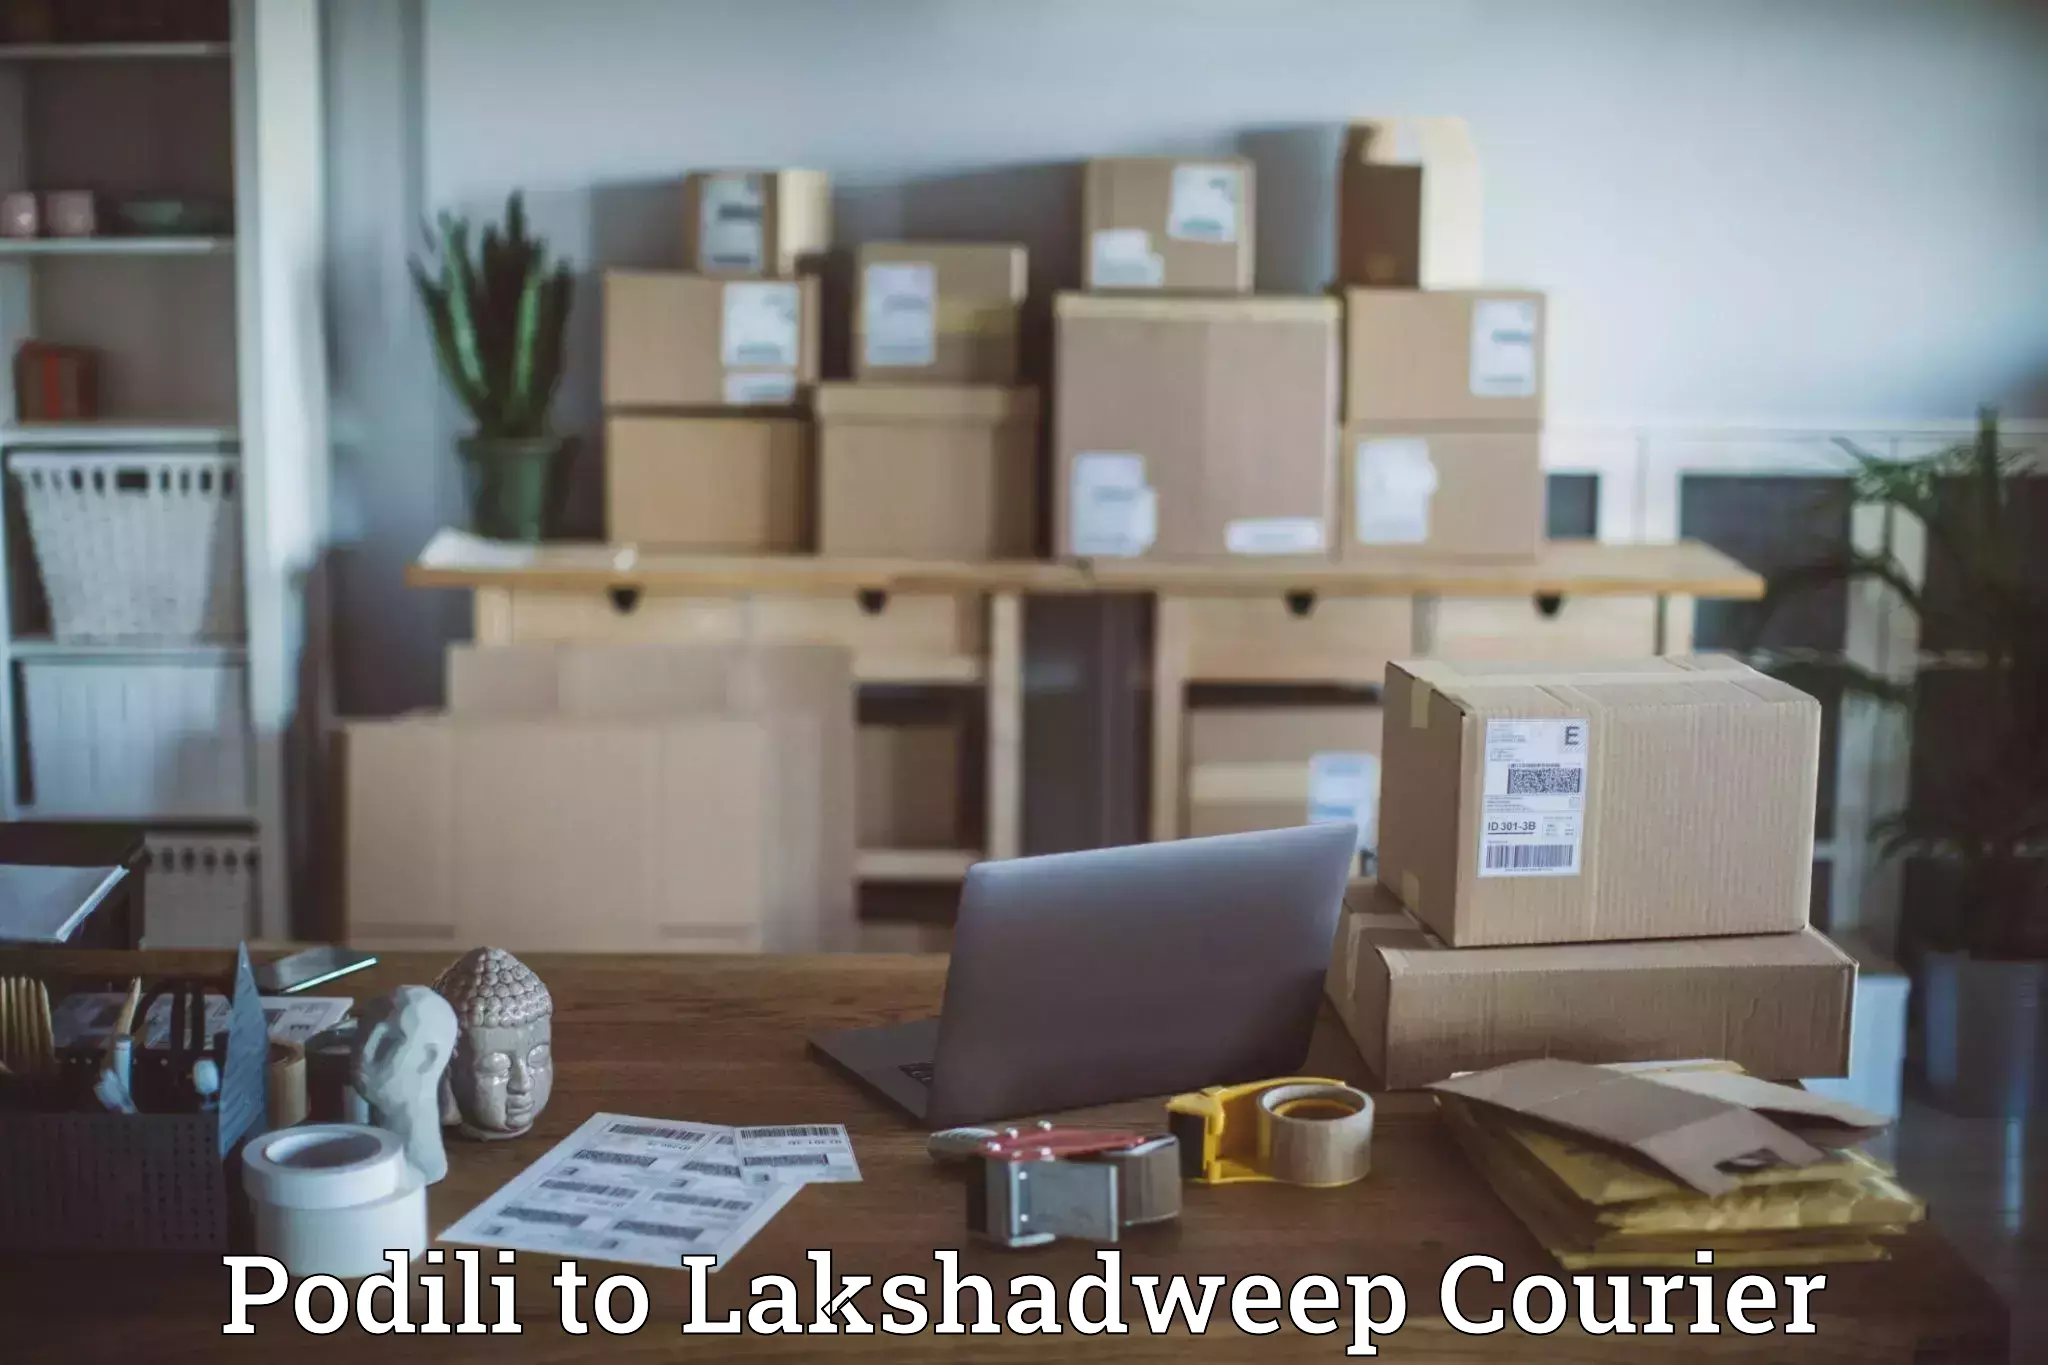 24-hour courier services Podili to Lakshadweep